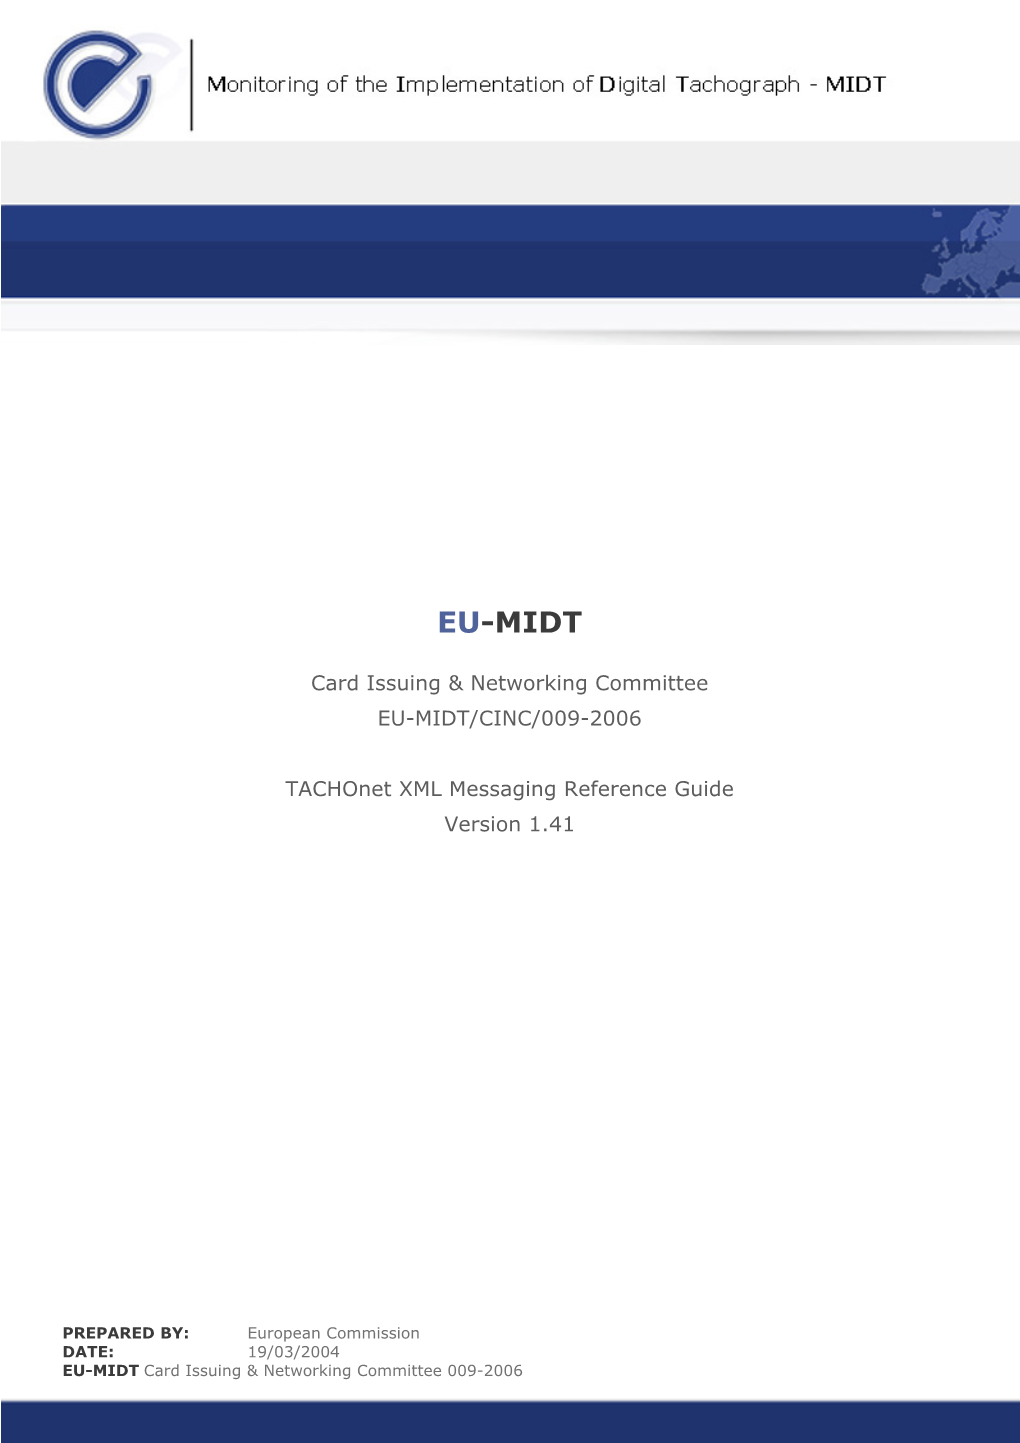 XML Messaging Reference Guide Version 1.41